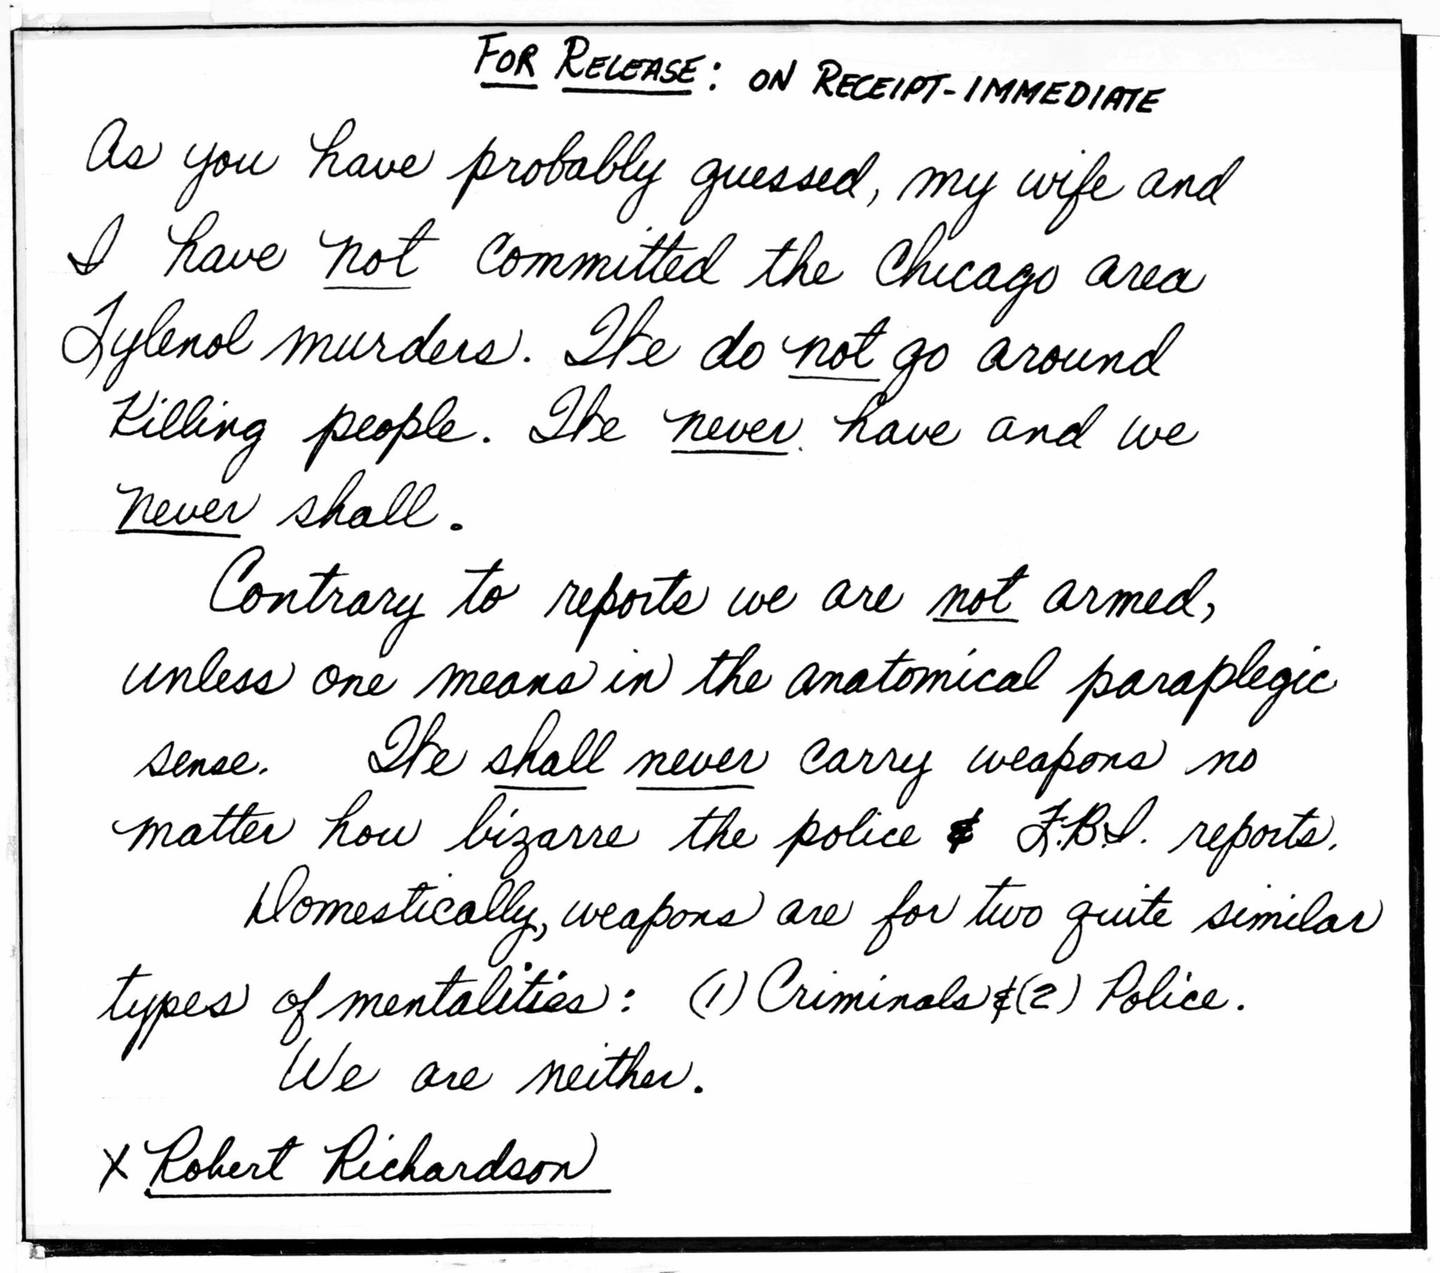 A 1982 letter to the Tribune, signed as Robert Richardson by James Lewis, denies responsibility for the Tylenol murders. 